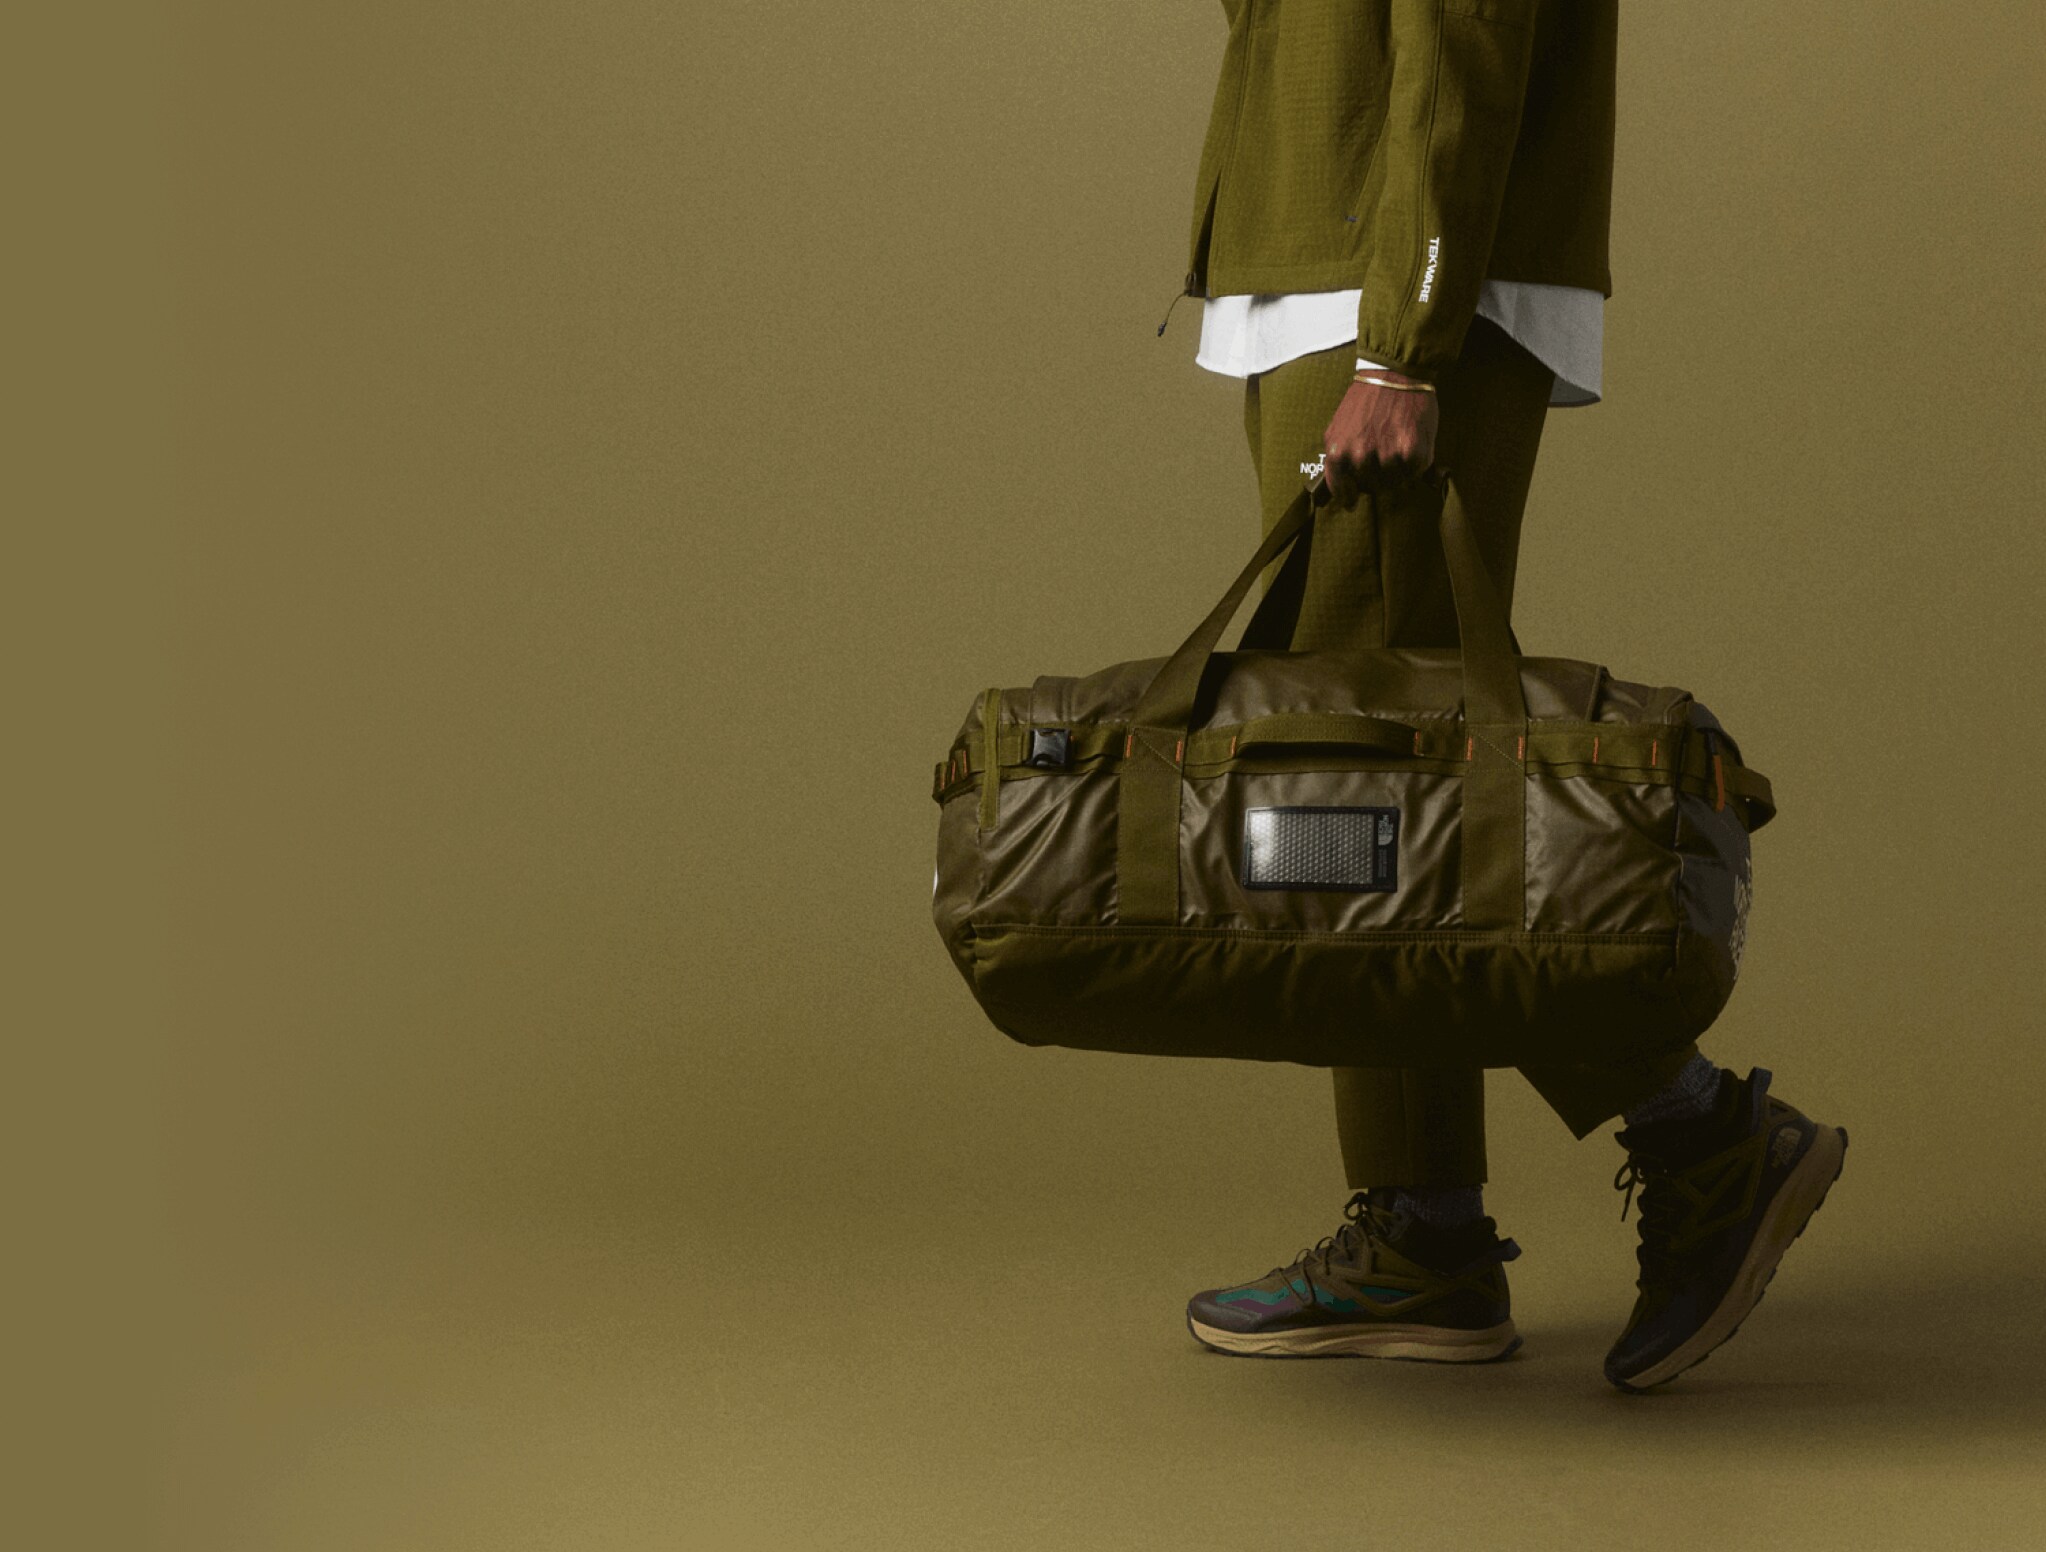 Studio shot of tonal olive green outfit and Base Camp Voyager Duffel on olive background.